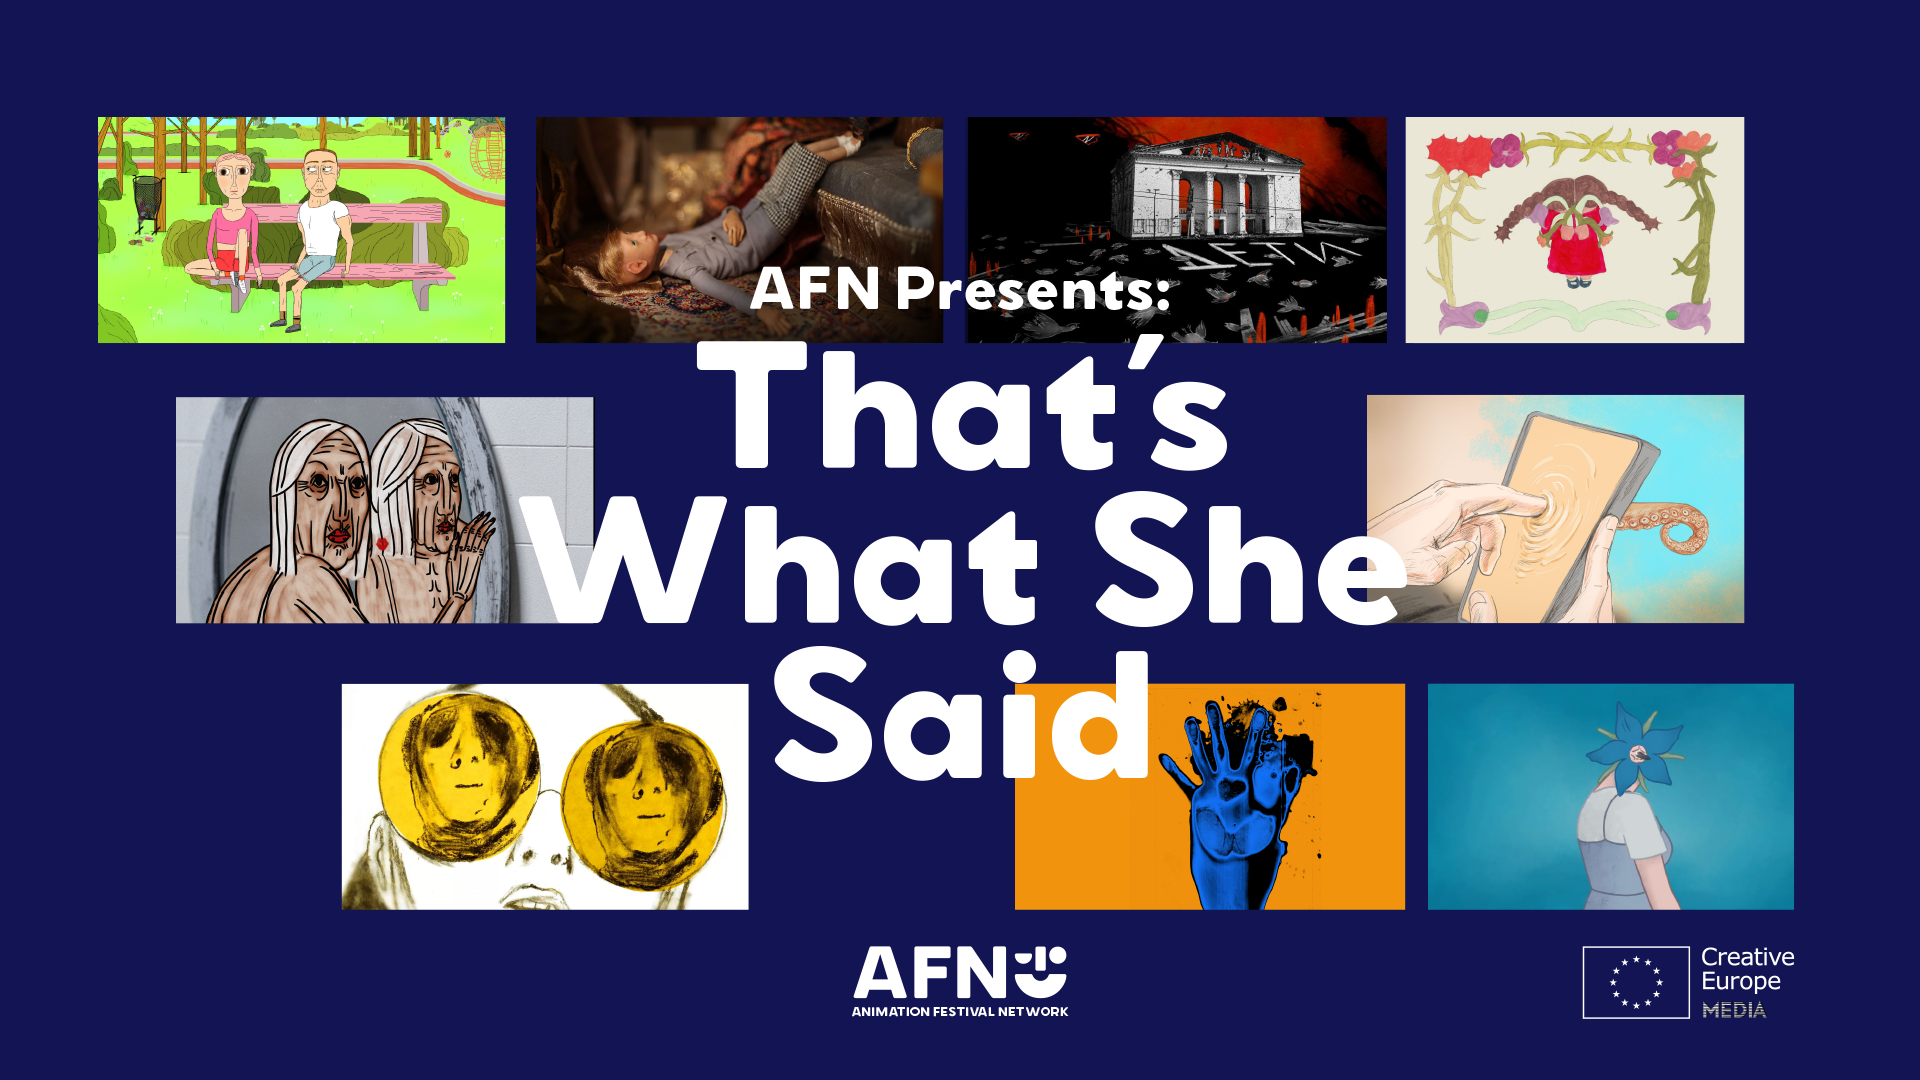 Animafest / AFN presents: That's What She Said